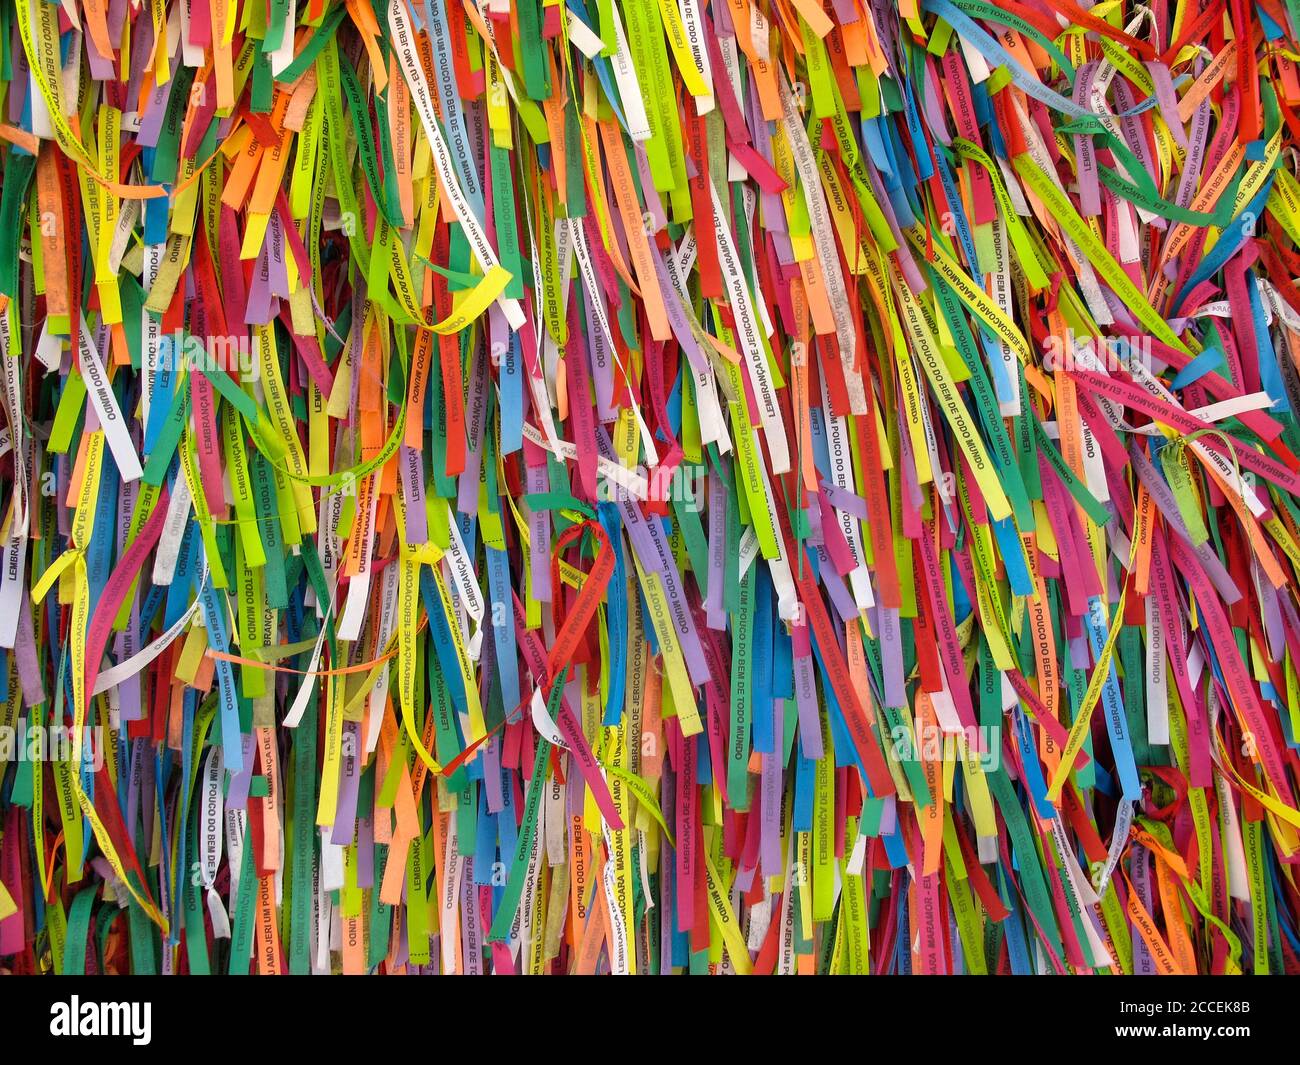 Jericoacoara, Ceara / Brazil - January, 20, 2020 - several colored ribbons and messages used by tourists as a travel souvenir in Jericoacoara, Ceara, Stock Photo